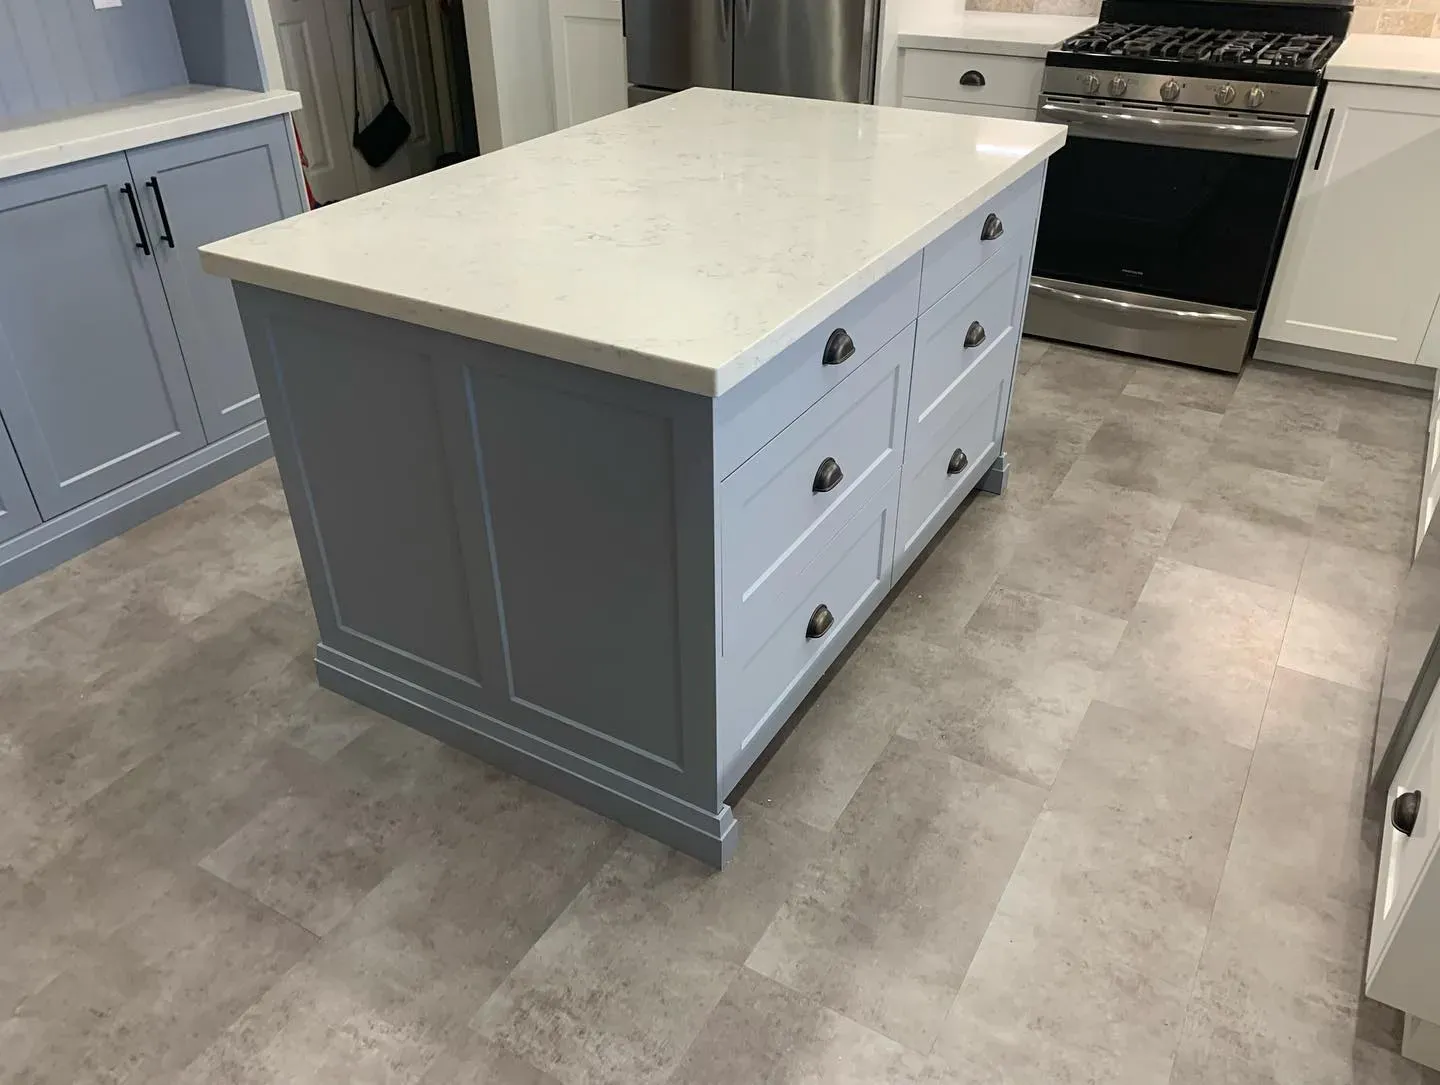 New Hope Gray kitchen cabinets color